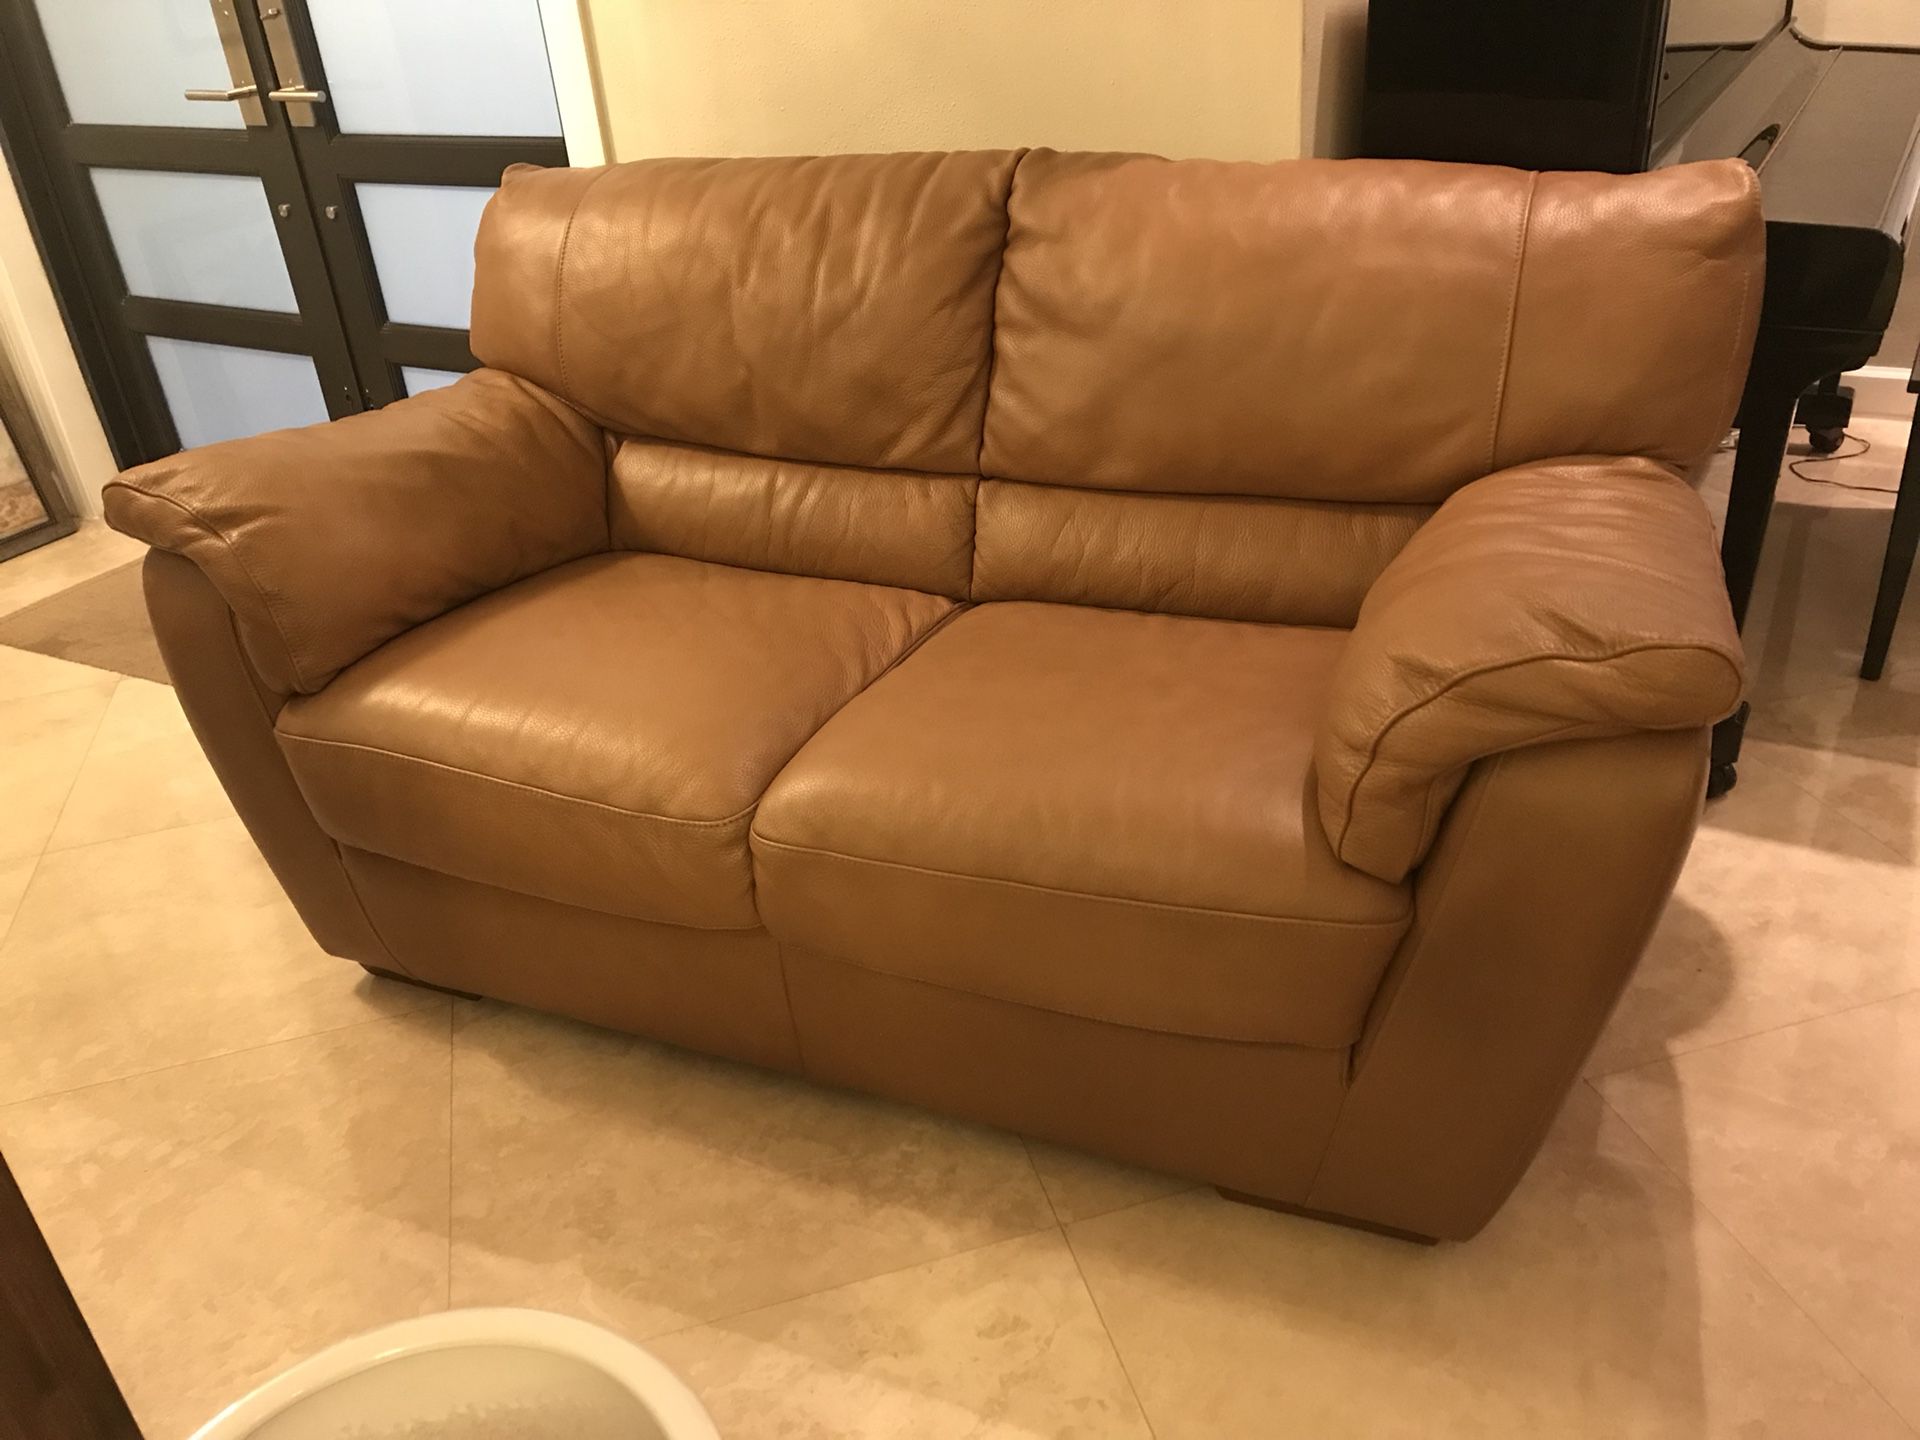 Natuzzi sofa and loveseat set Leather. Not reclining. will sell separate couch